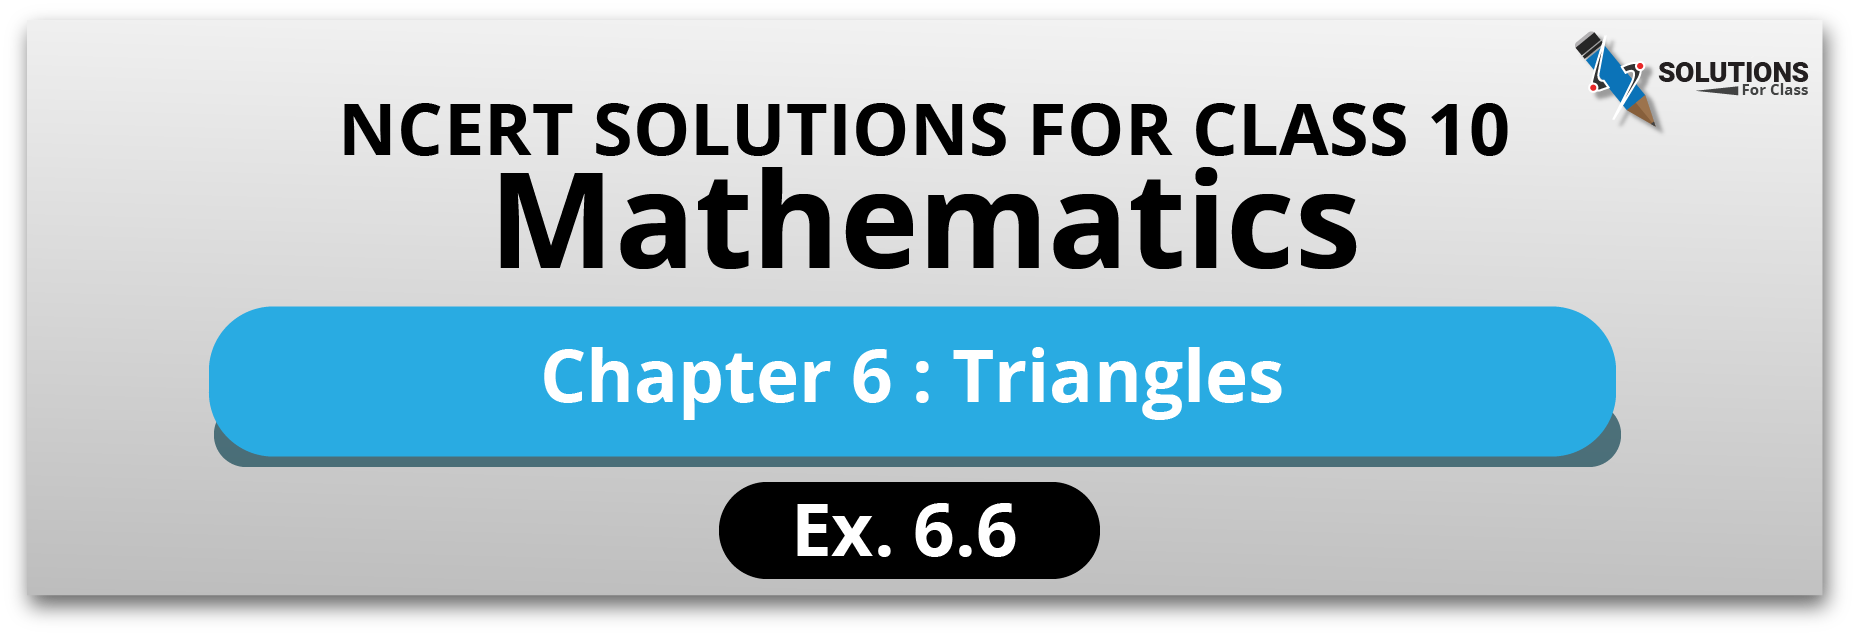 NCERT Solution For Class 10, Maths, Chapter 6 Triangles, Exercise 6.6